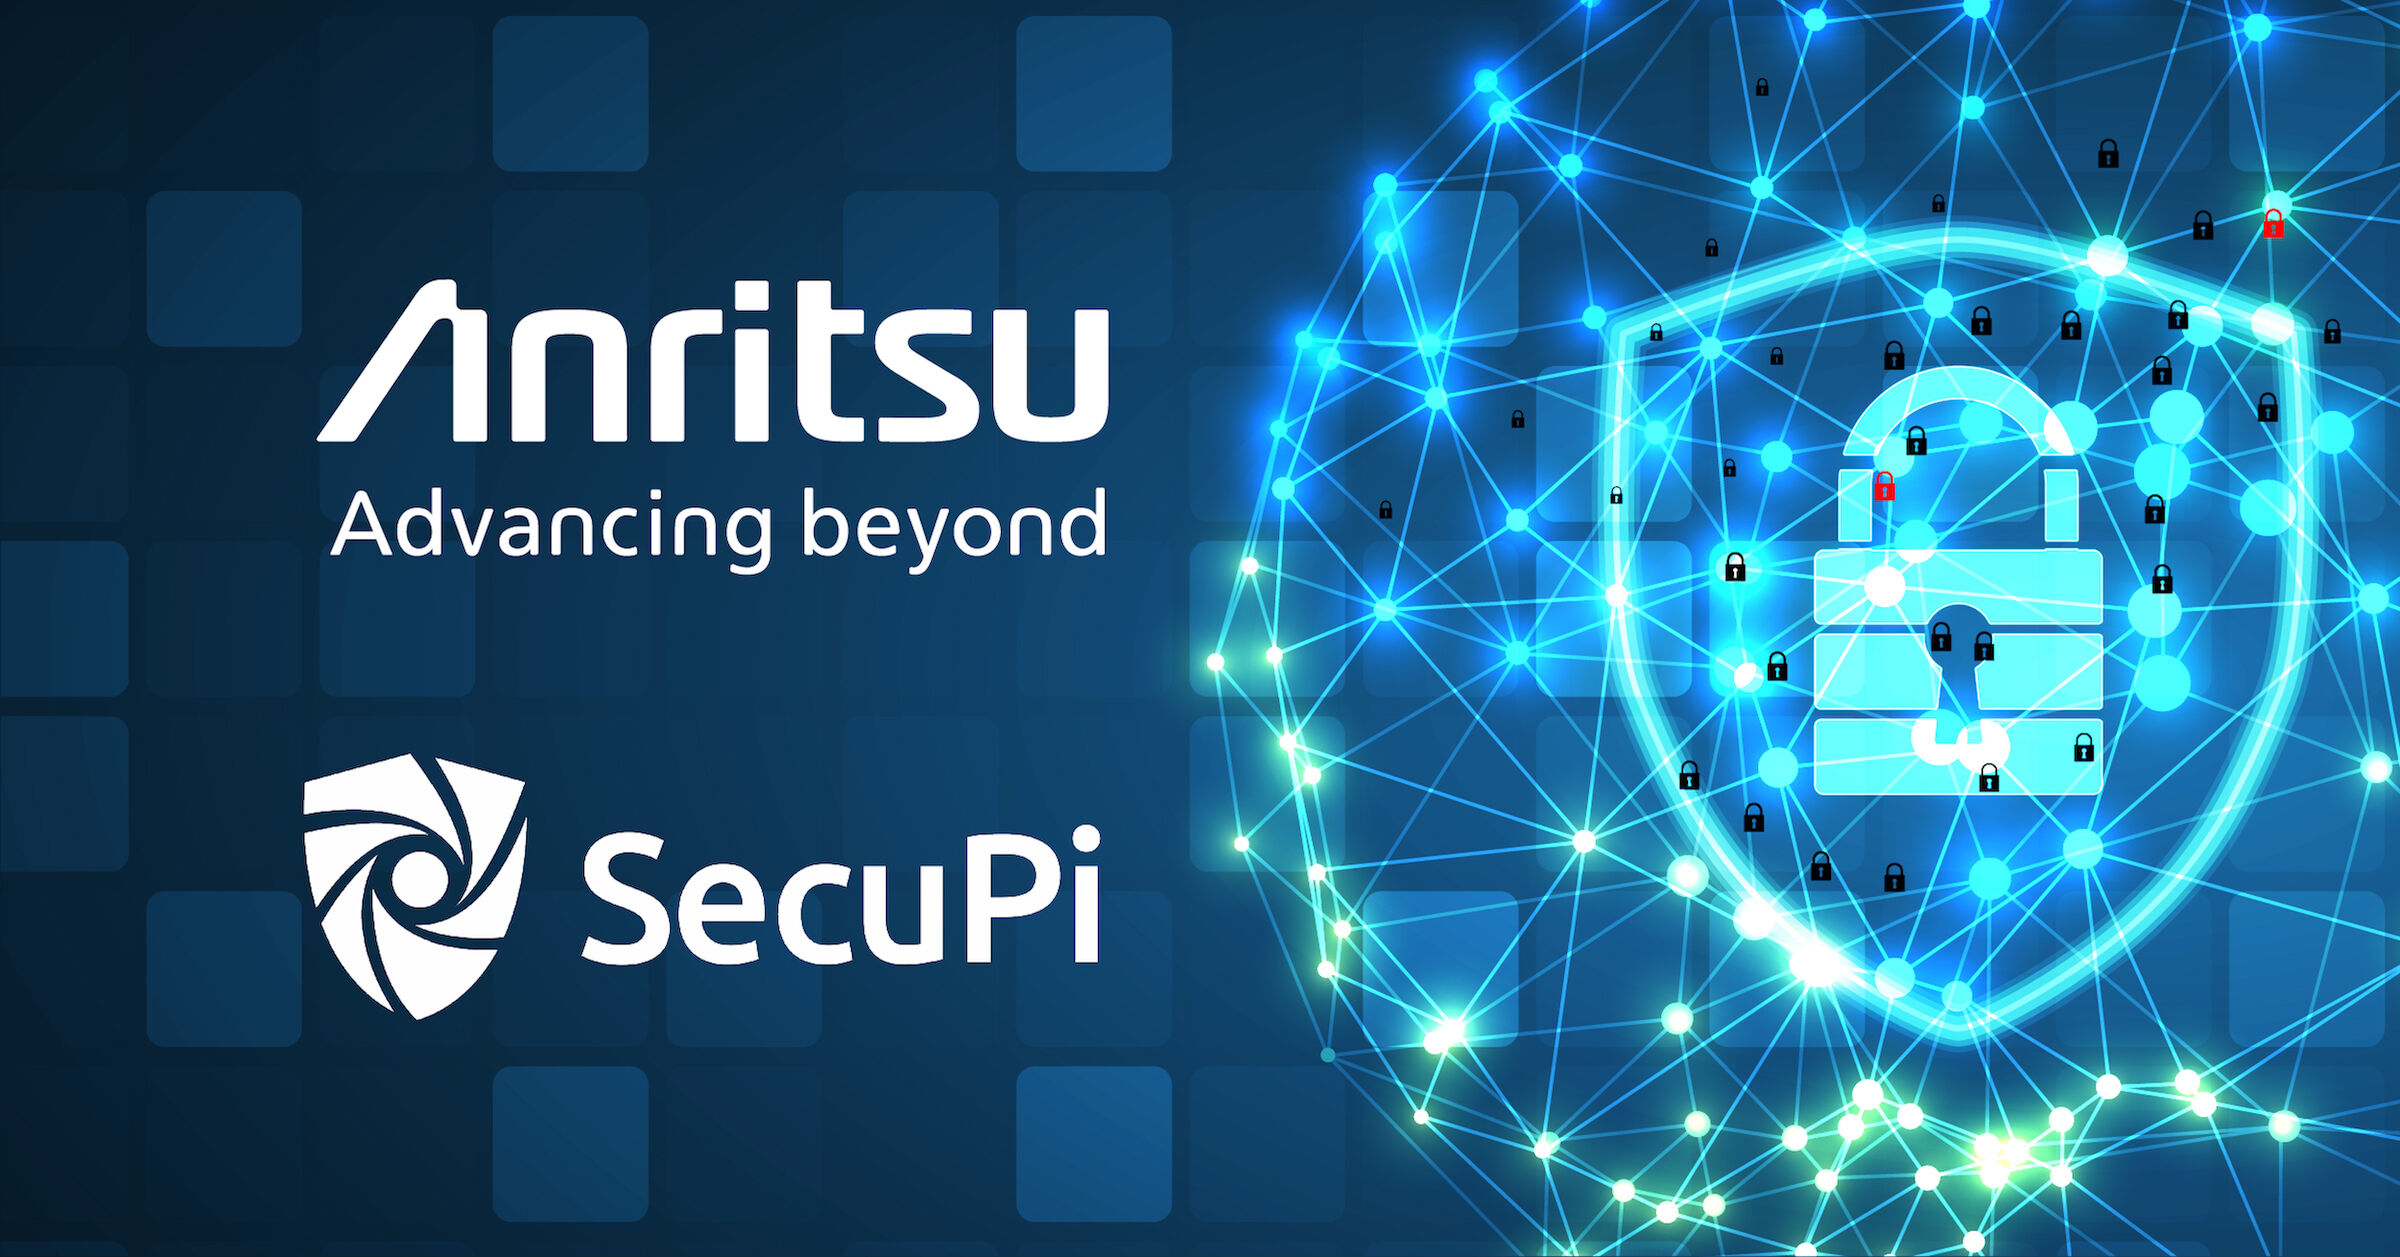 Anritsu and SecuPi announce a partnership with the launch of Data Protection and GDPR Data Compliance for Automated Assurance in a Tier-1 European Telecommunications Provider